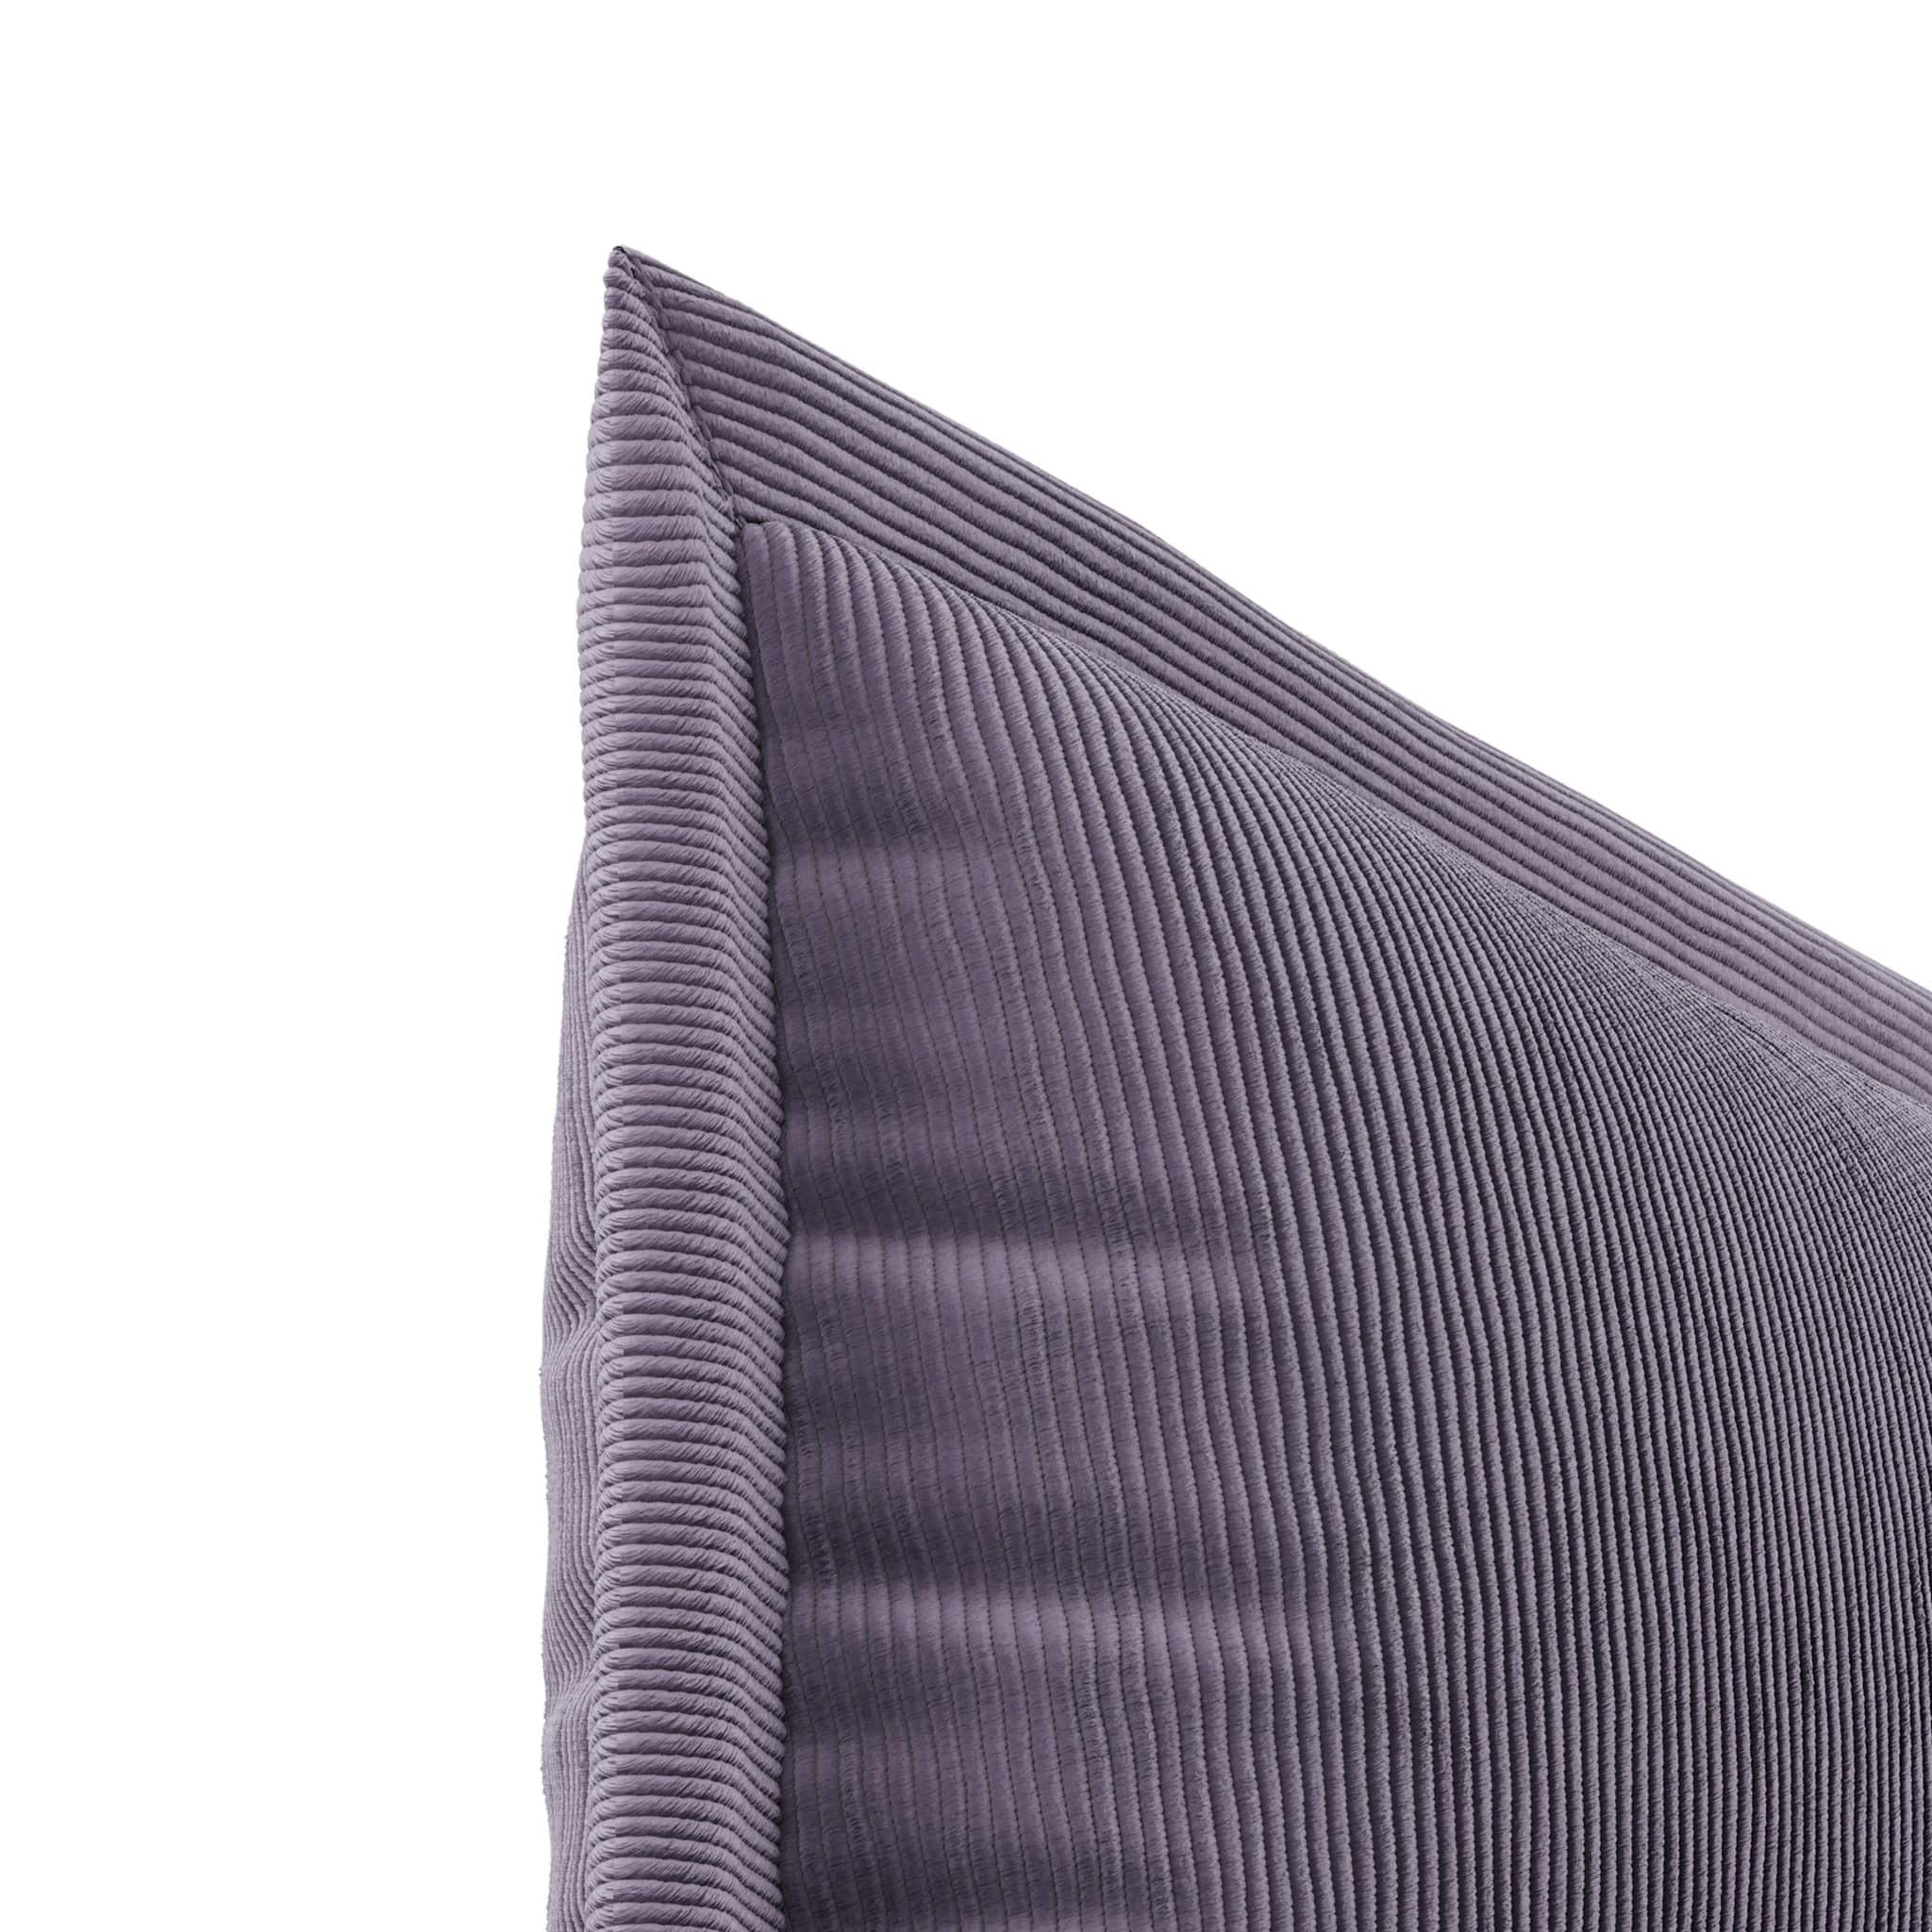 Decorative Throw Pillow Purple Corduroy, Modern Ribbed Velvet Lumbar Cushion 
Purple is a rectangle flange pillow in plush corduroy fabric with a plum color. 
This absolute must-have throw pillow has a refined and playful feel that will give you